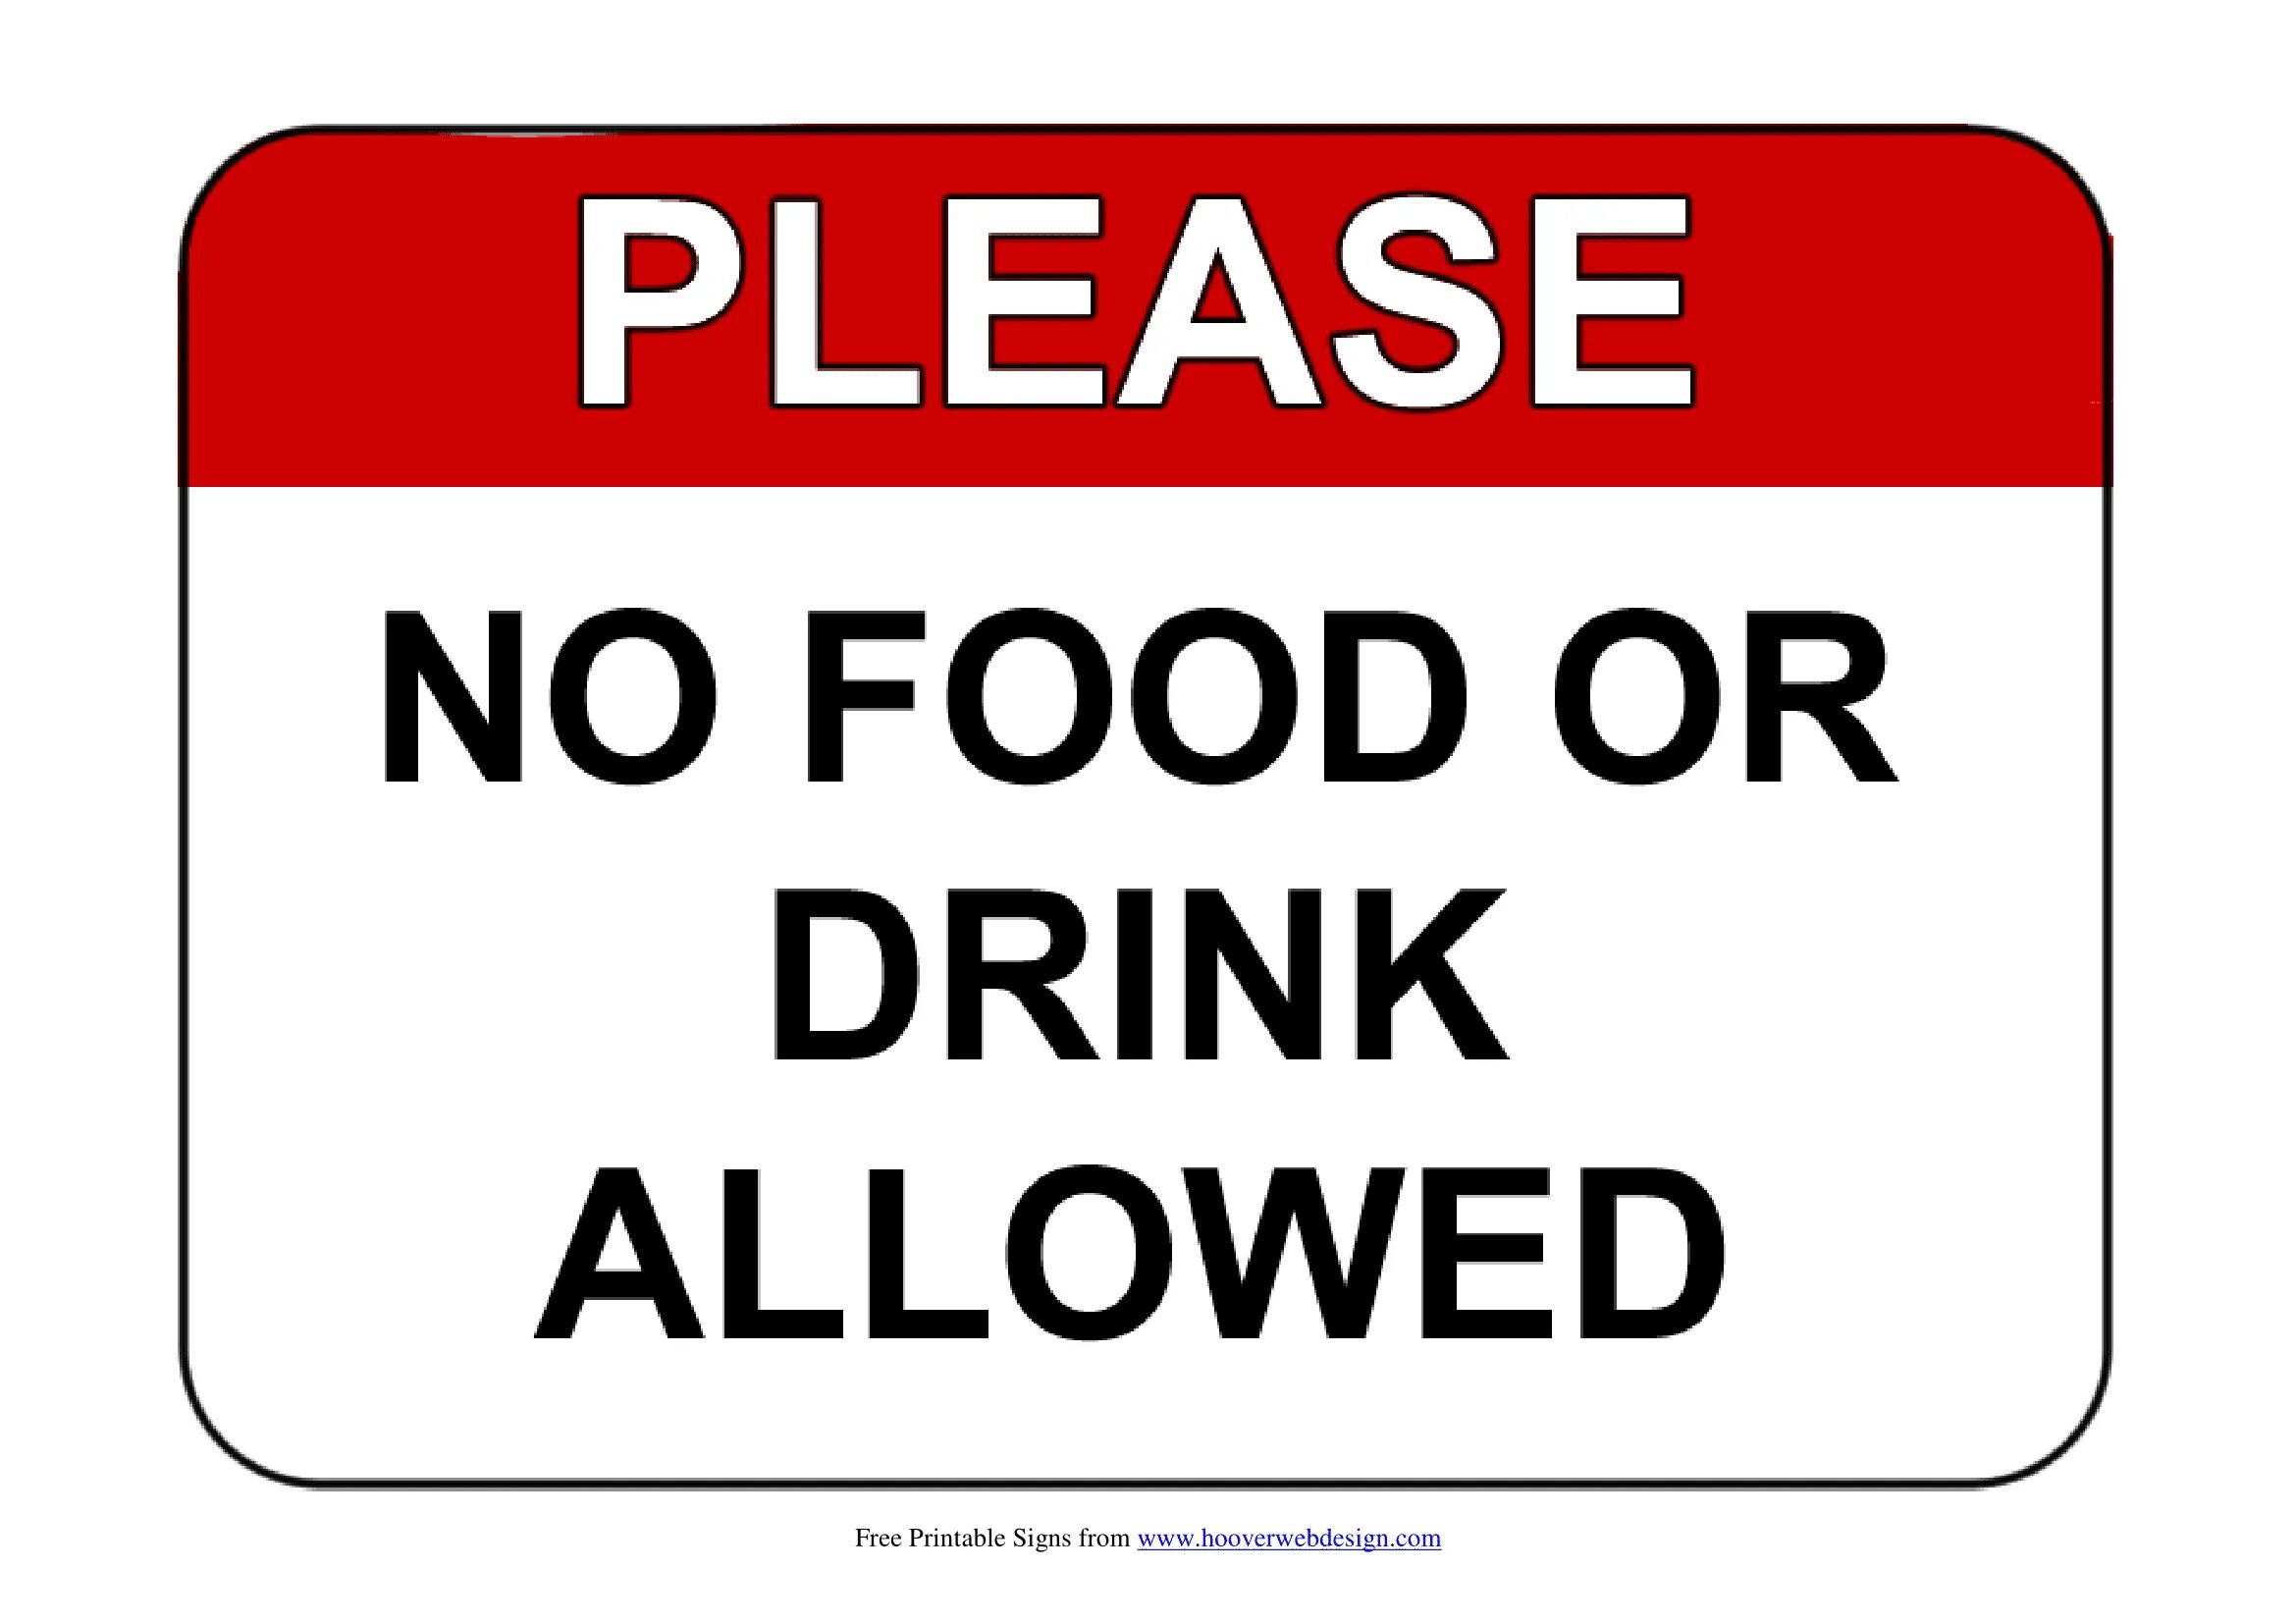 Property is not allowed. No food or Drink. Food sign. Not allowed. No food or Drink in this area.